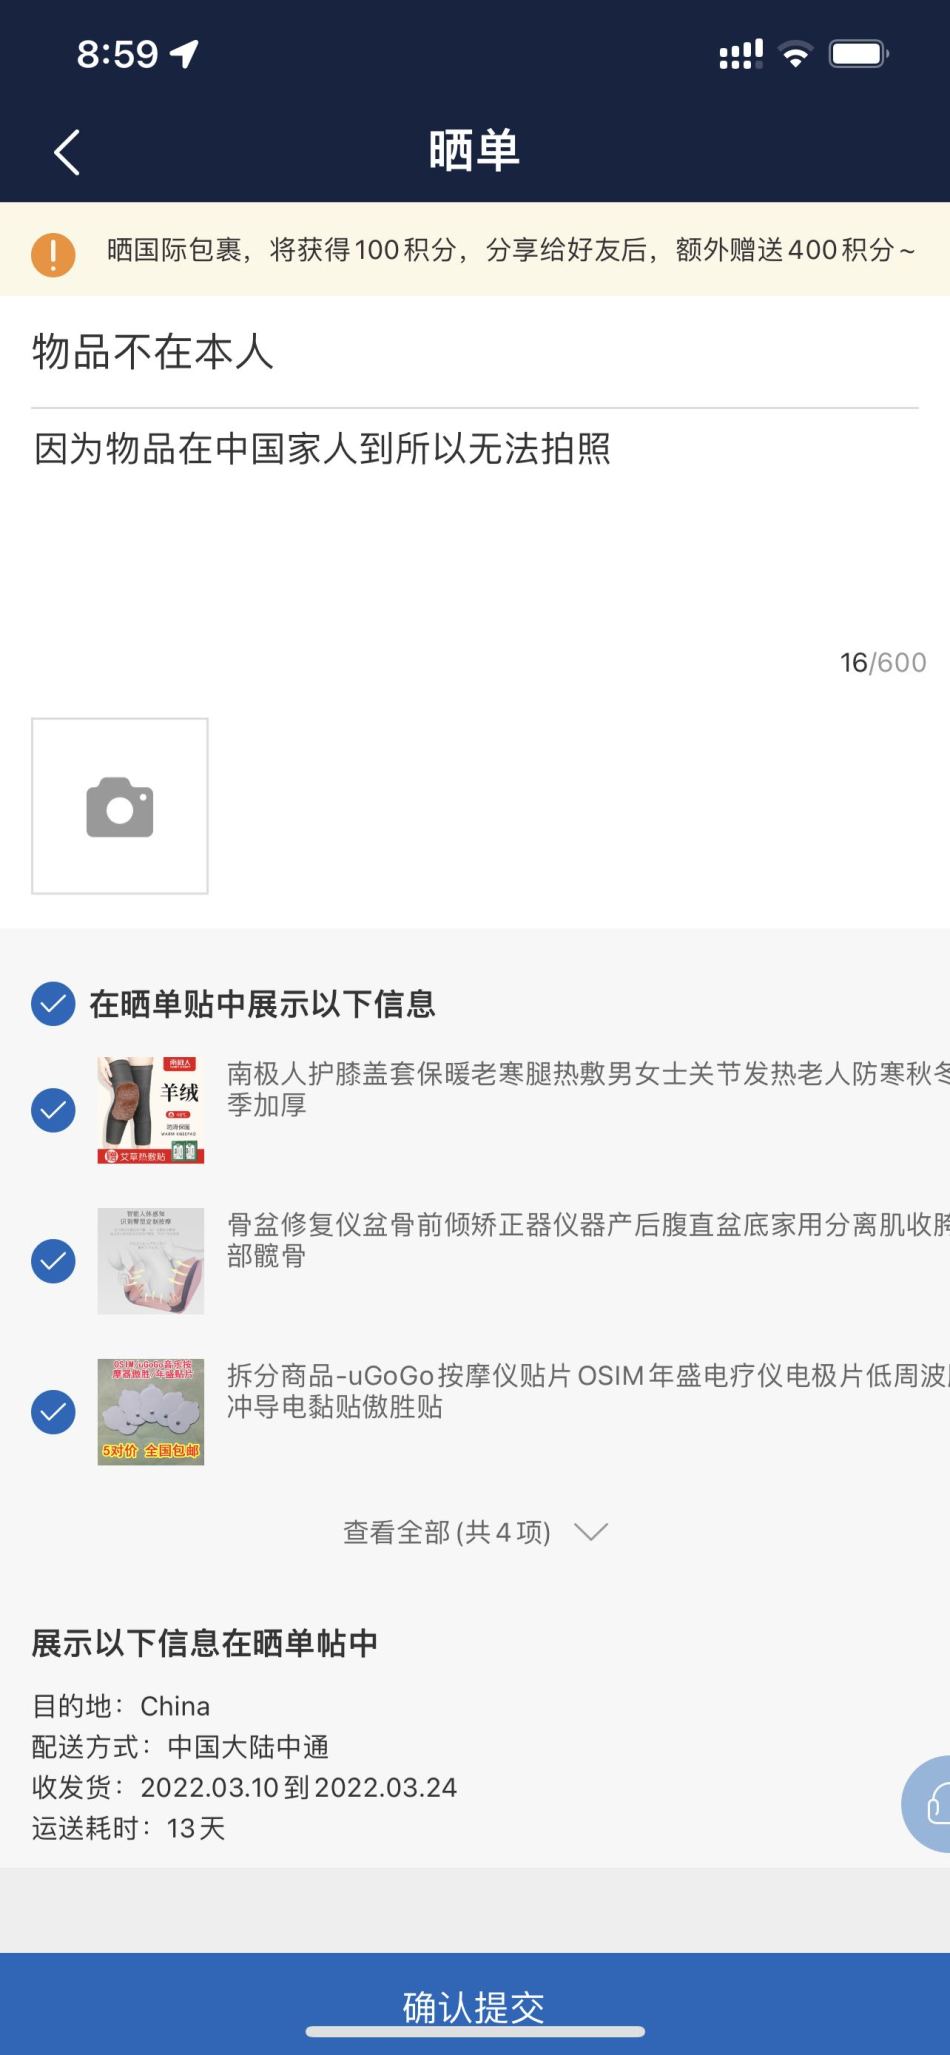 https://img1.superbuy.com/images/consult/2022/10/05/5ef88900d2963cdeb8be2054496a9625.jpg?x-oss-process=image/resize,w_950